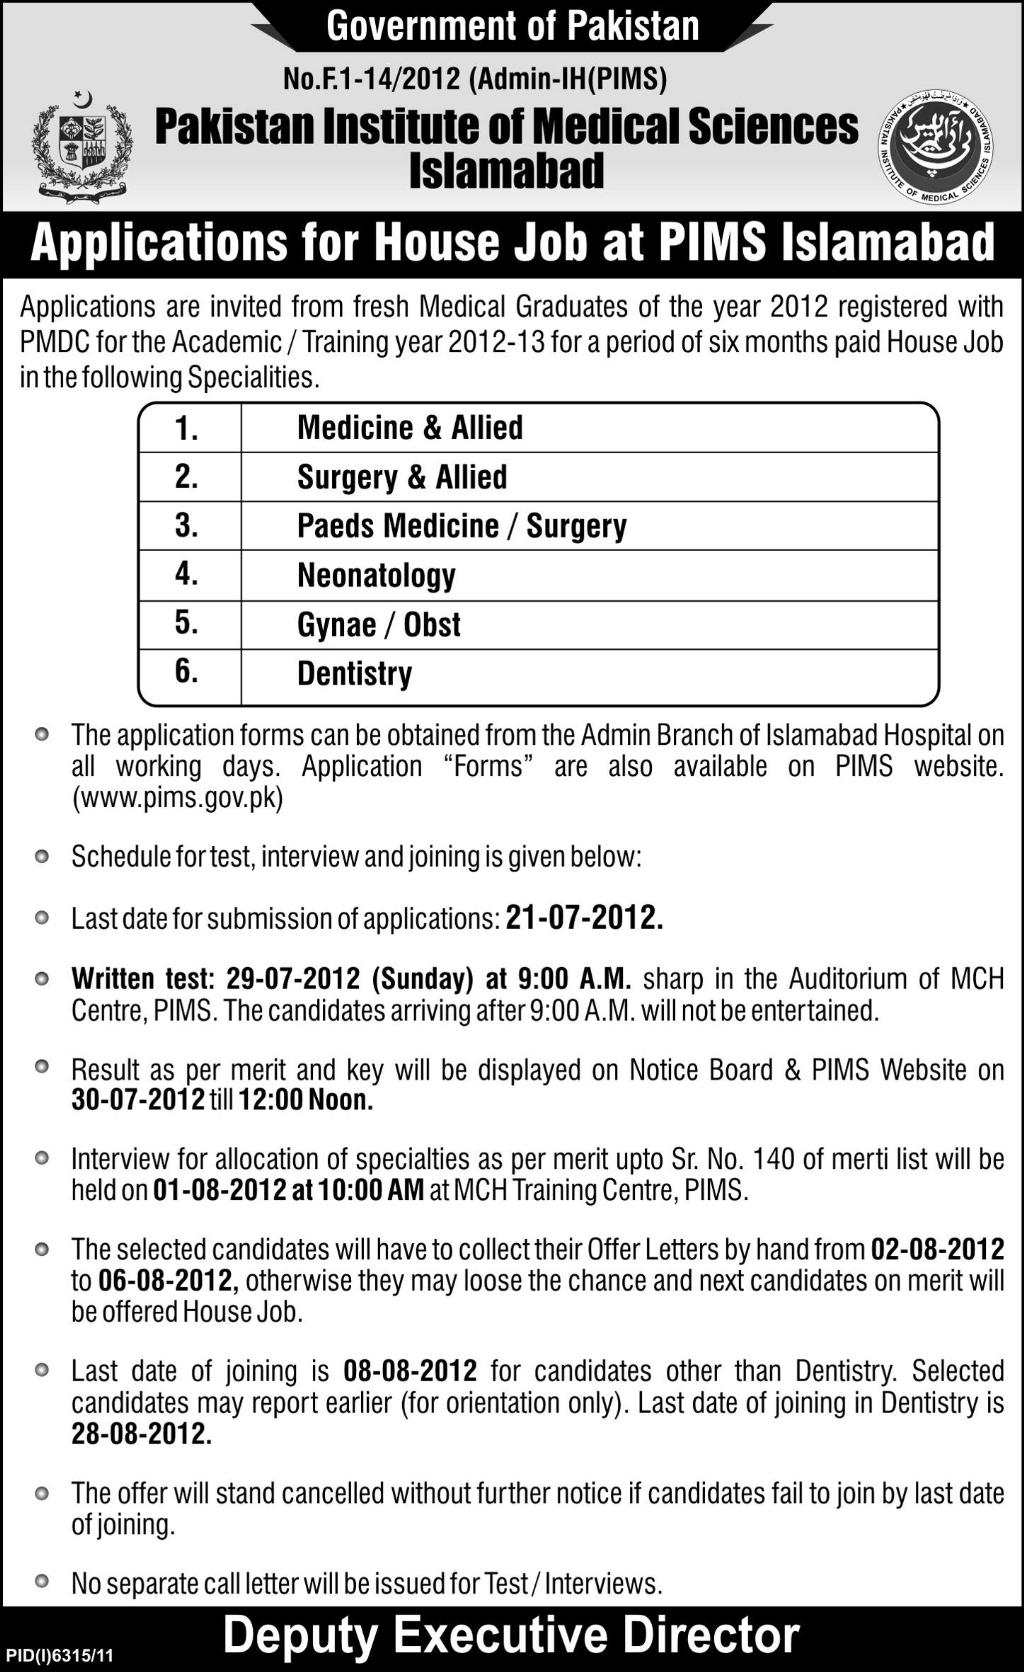 Applications are Required for House Job at Pakistan Institute of Medical Sciences (PIMS)